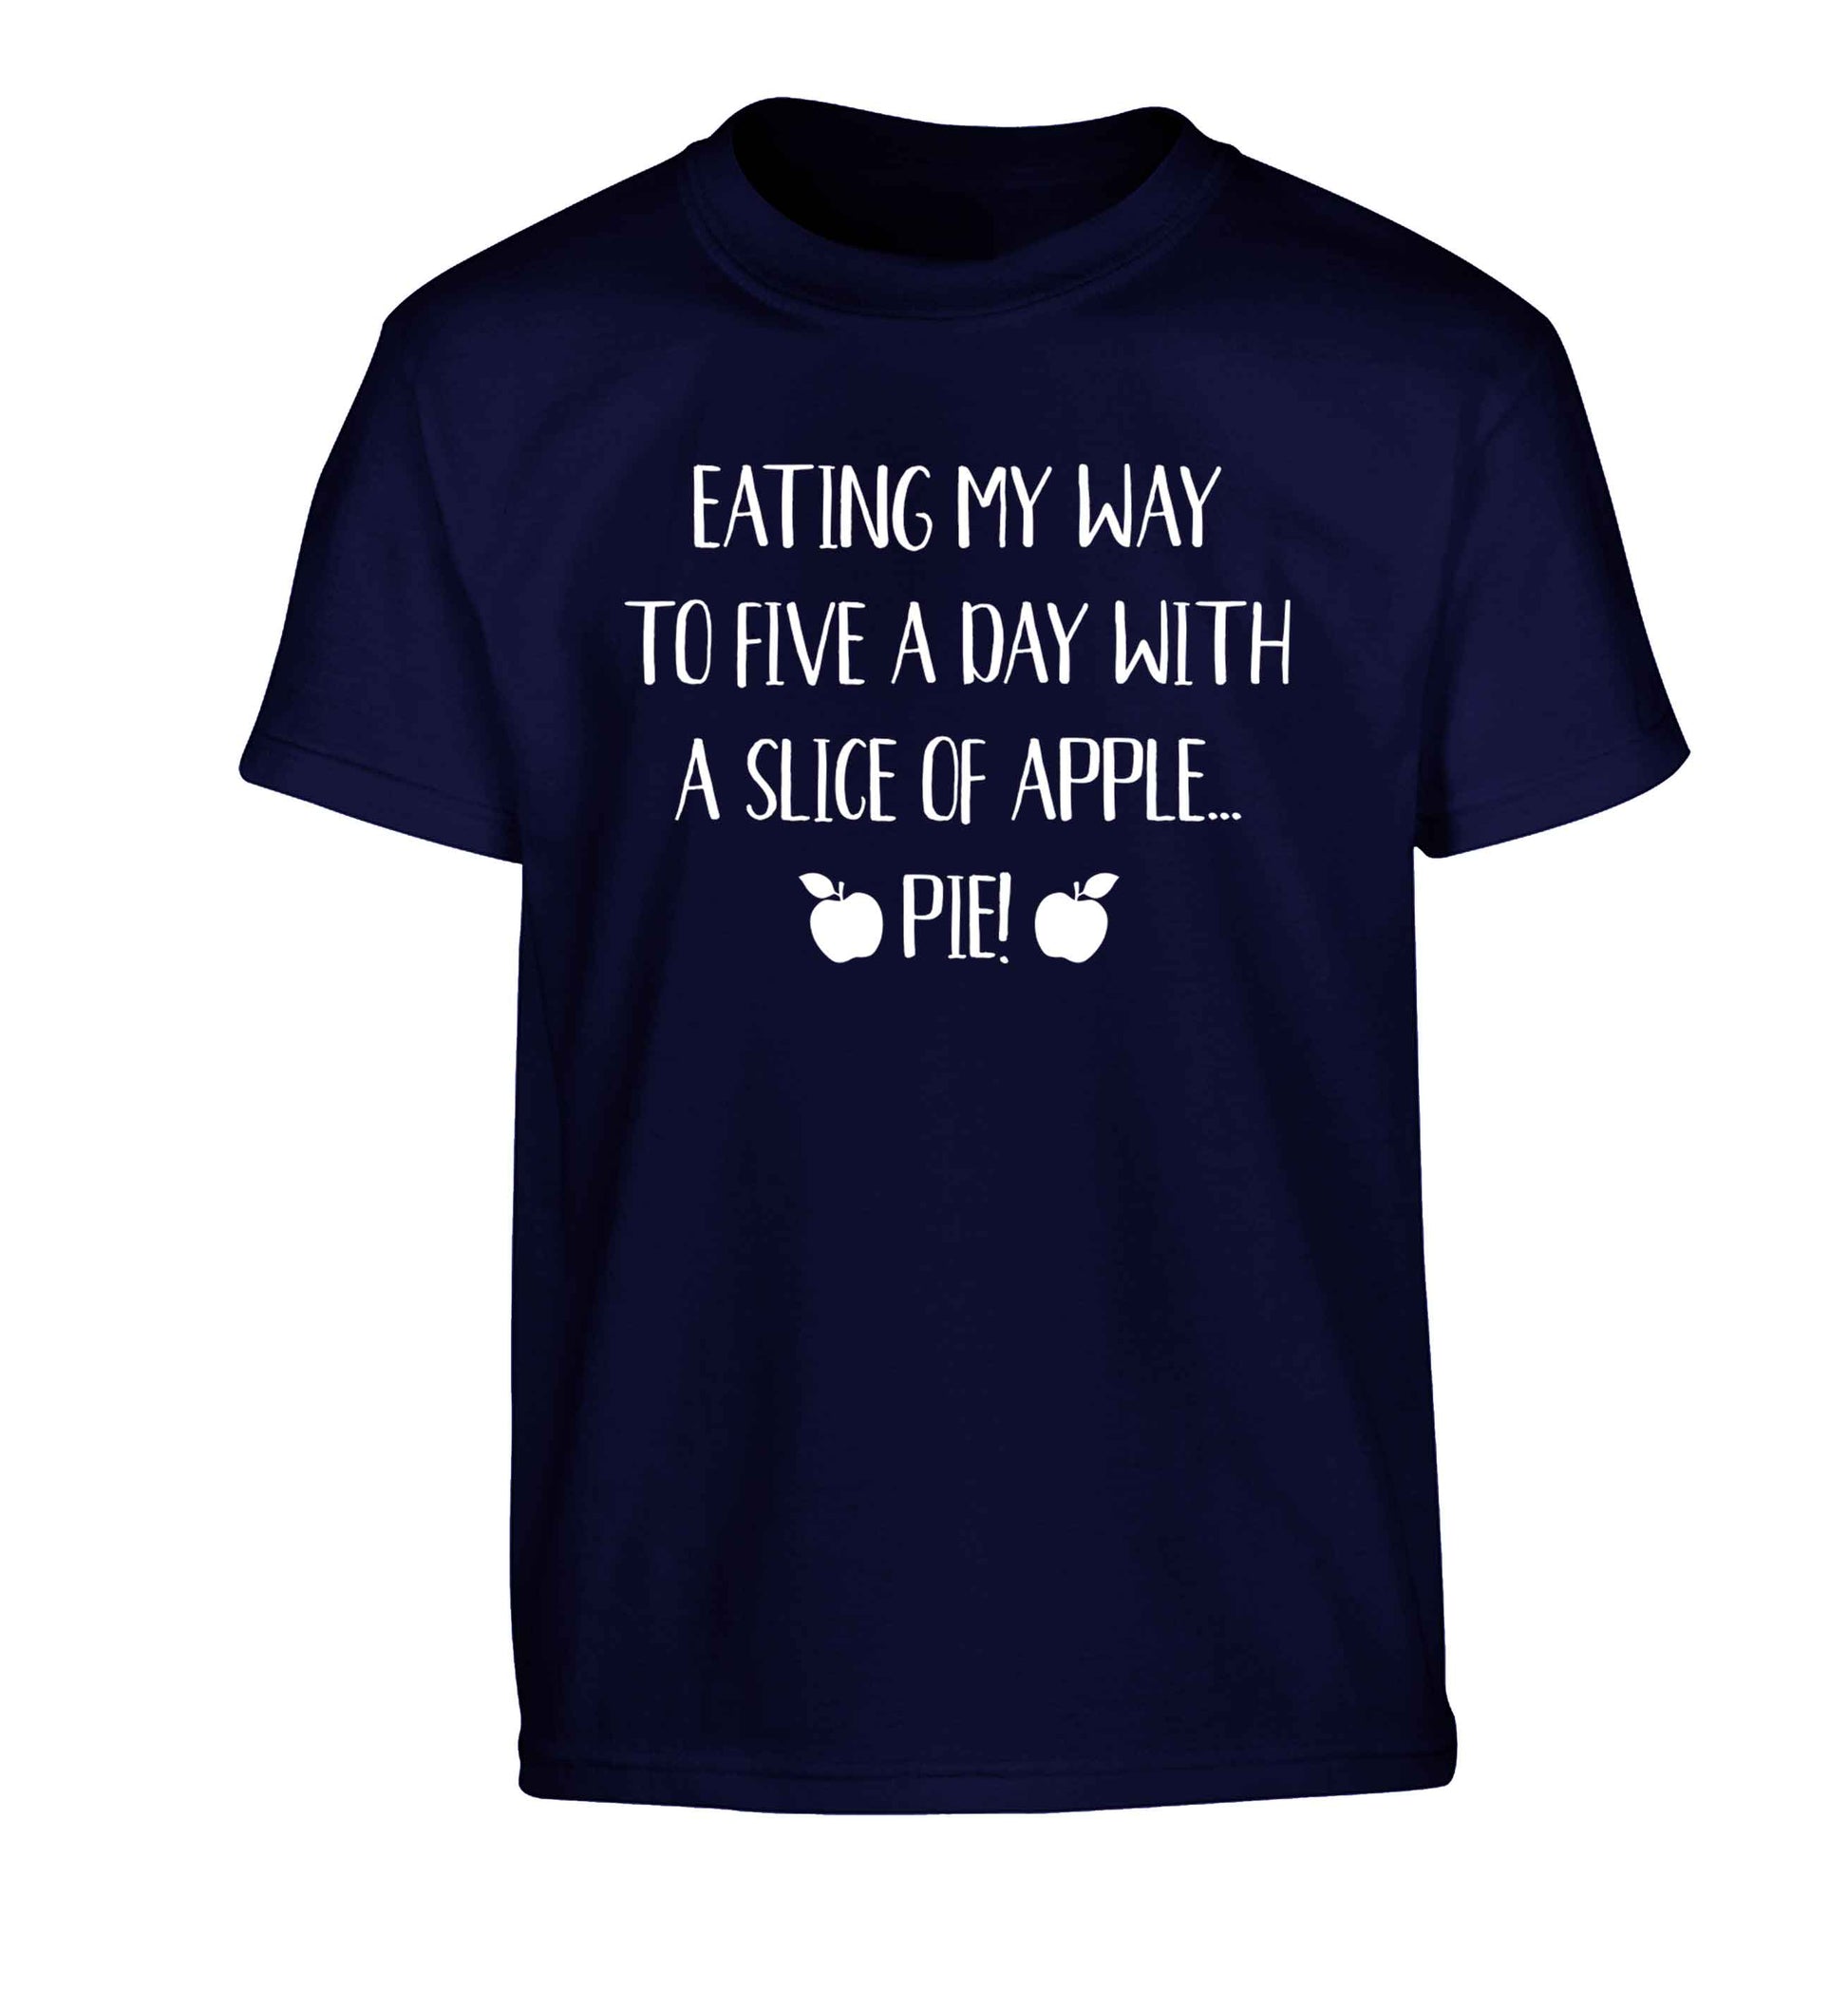 Eating my way to five a day with a slice of apple pie Children's navy Tshirt 12-13 Years